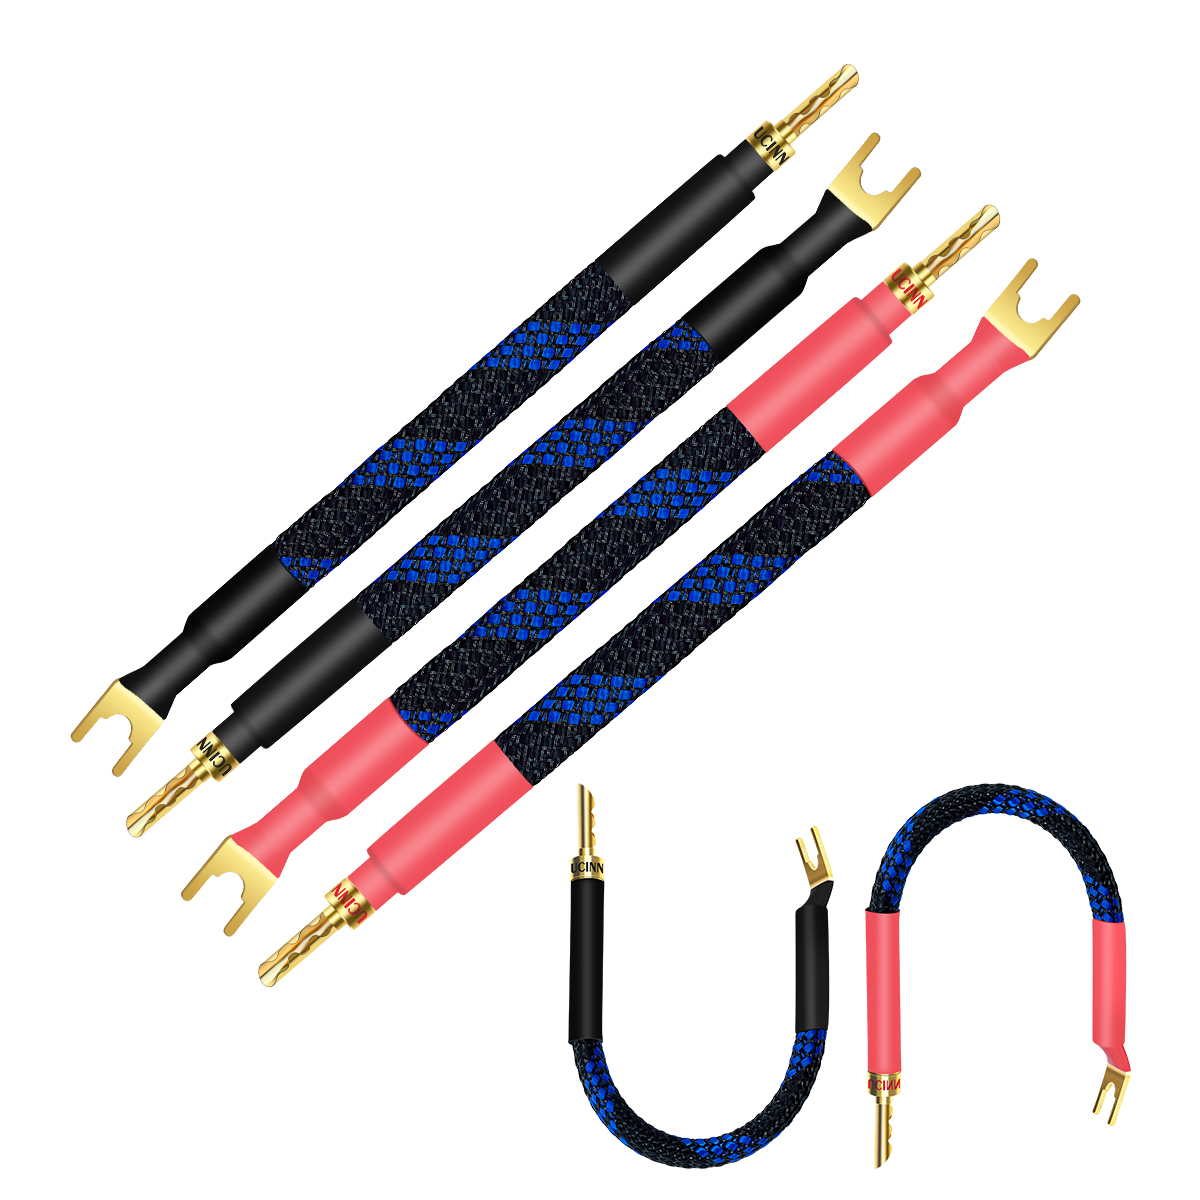 UCINNOVATE BFA Speaker Jumper cables with Banana Plugs, 4 Pack 20cm/7.8” BFA to Y Plug Banana Bi-Wire Speaker Cable Bridge, 11AWG HiFi Speaker Jumper Cable with Gold Plated Spade for Home Theater